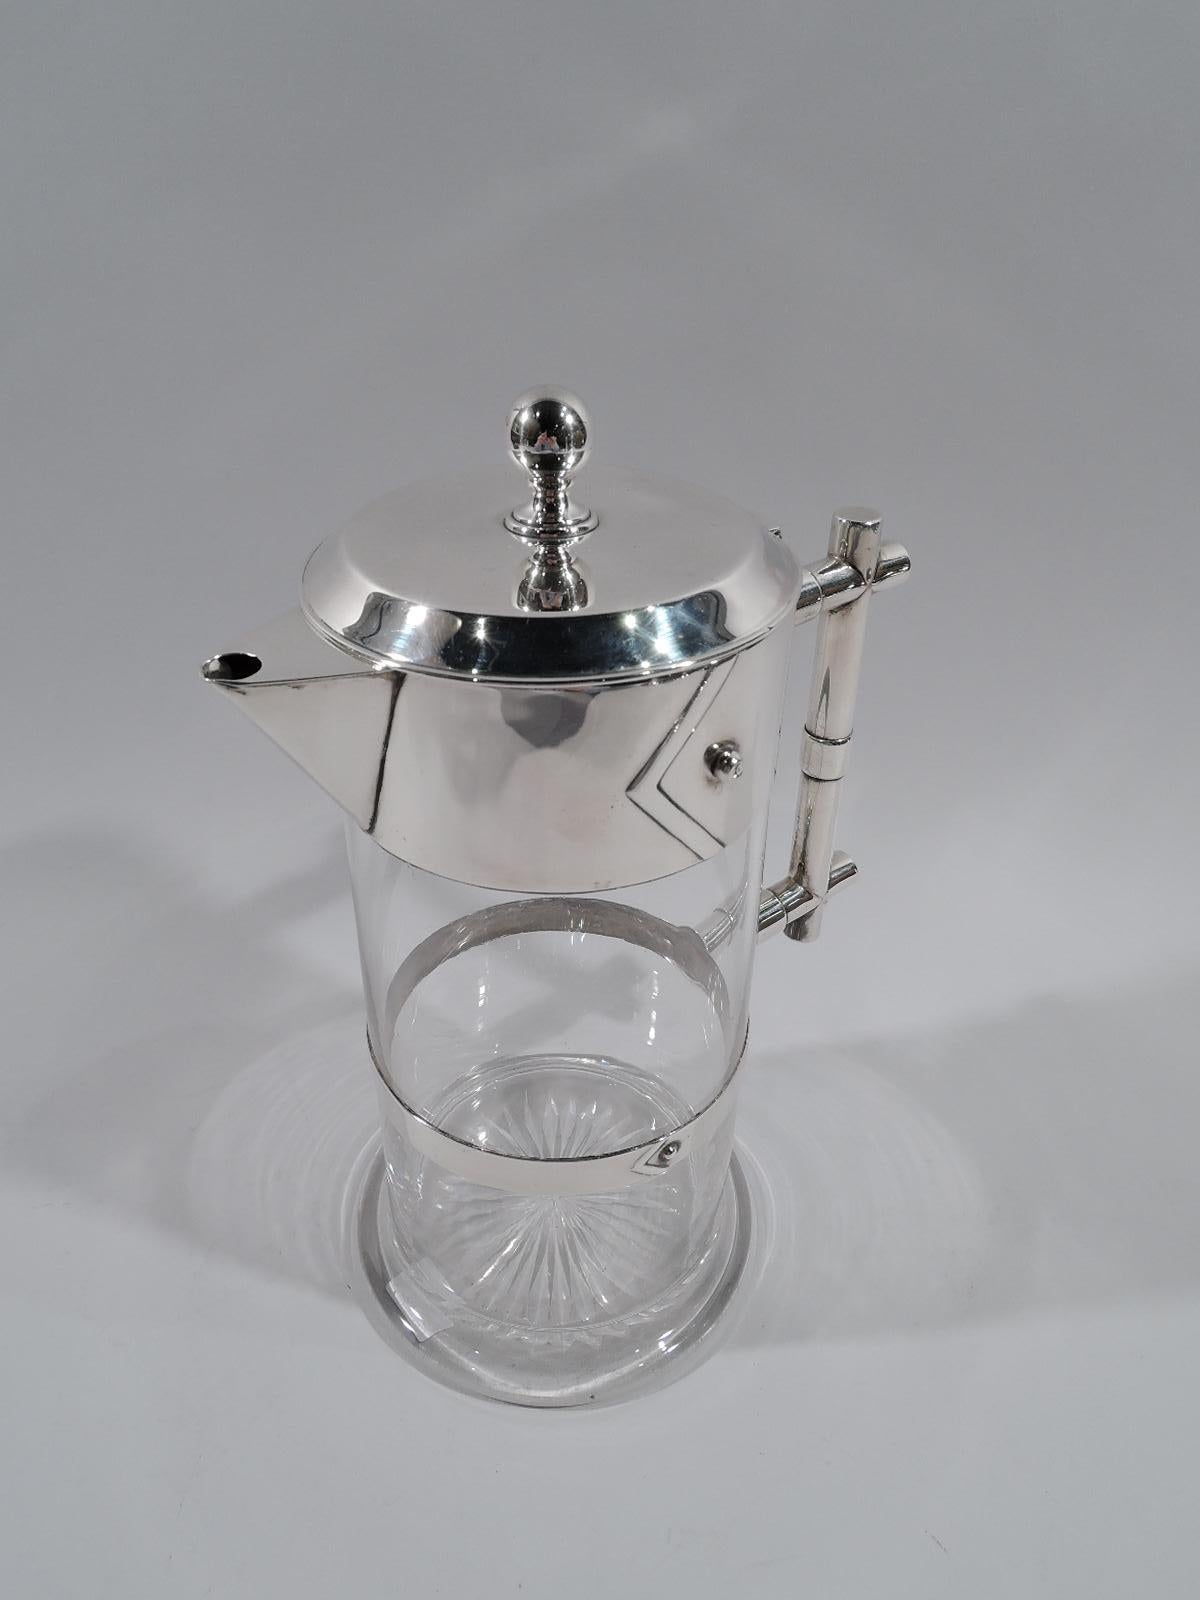 Victorian modern sterling silver and glass decanter. Made by Edgar Finley & Hugh Taylor in Birmingham in 1884. Clear glass cylinder on round and spread base. Flat girdle with applied chevron and stud. Rim collar same with triangular spout. Cover